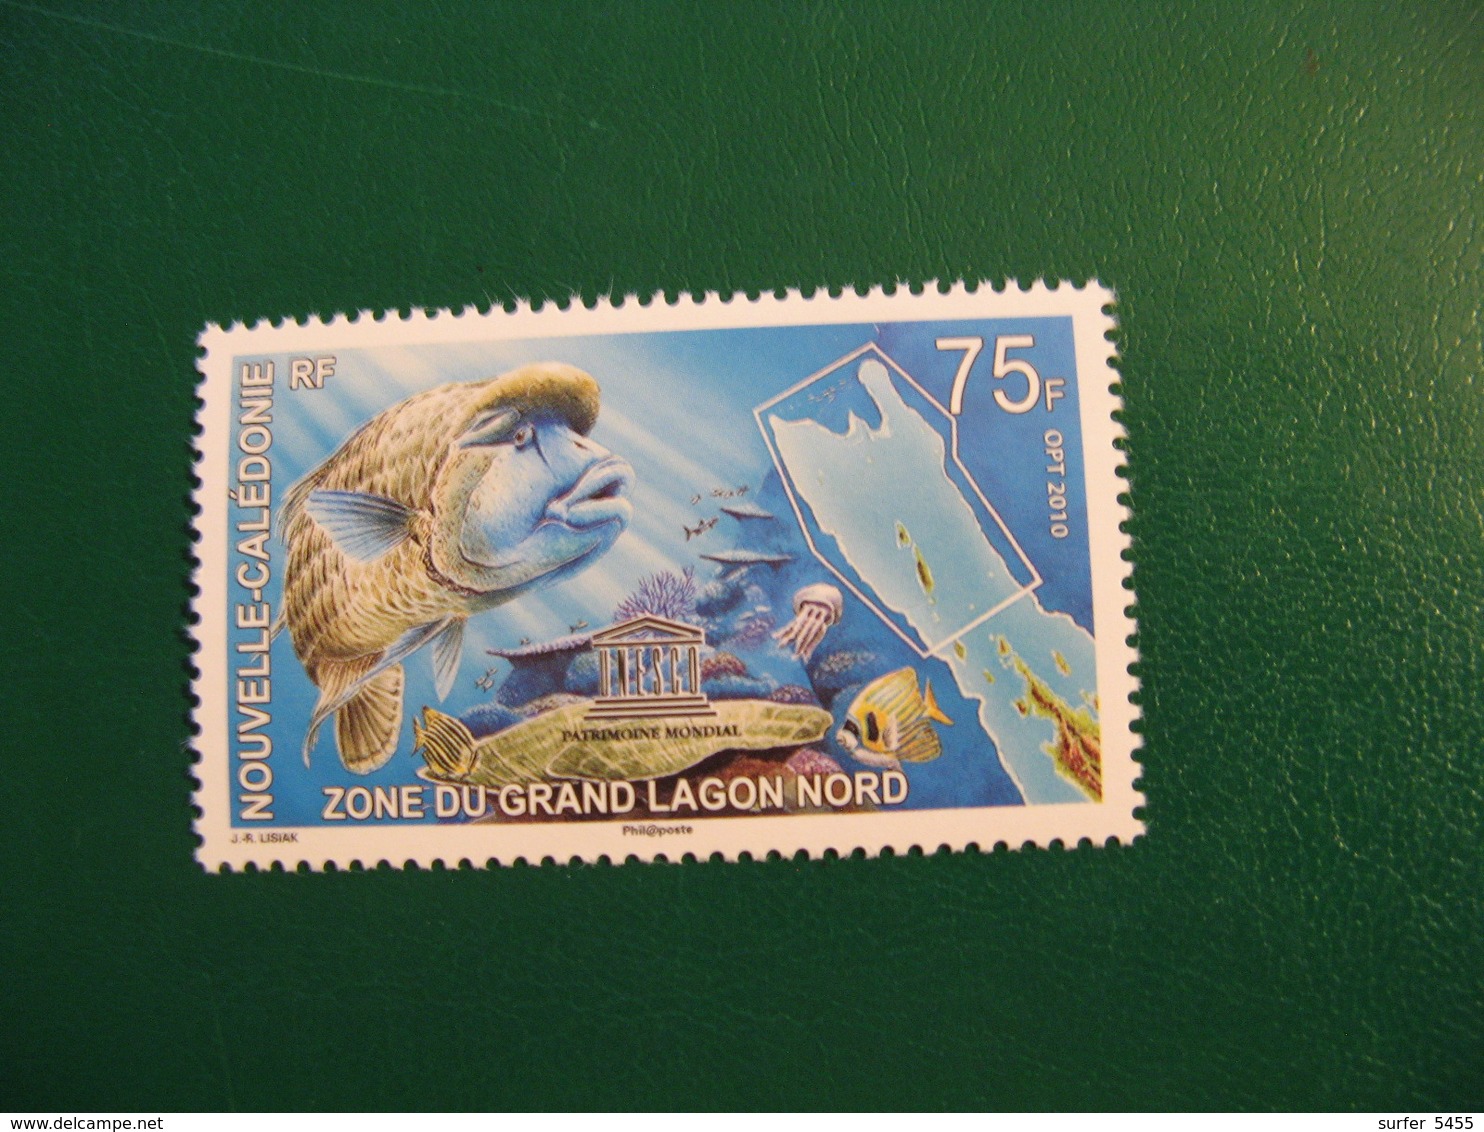 NOUVELLE CALEDONIE YVERT POSTE ORDINAIRE N° 1116 NEUF** LUXE - MNH - FACIALE 0,63 EURO - Unused Stamps